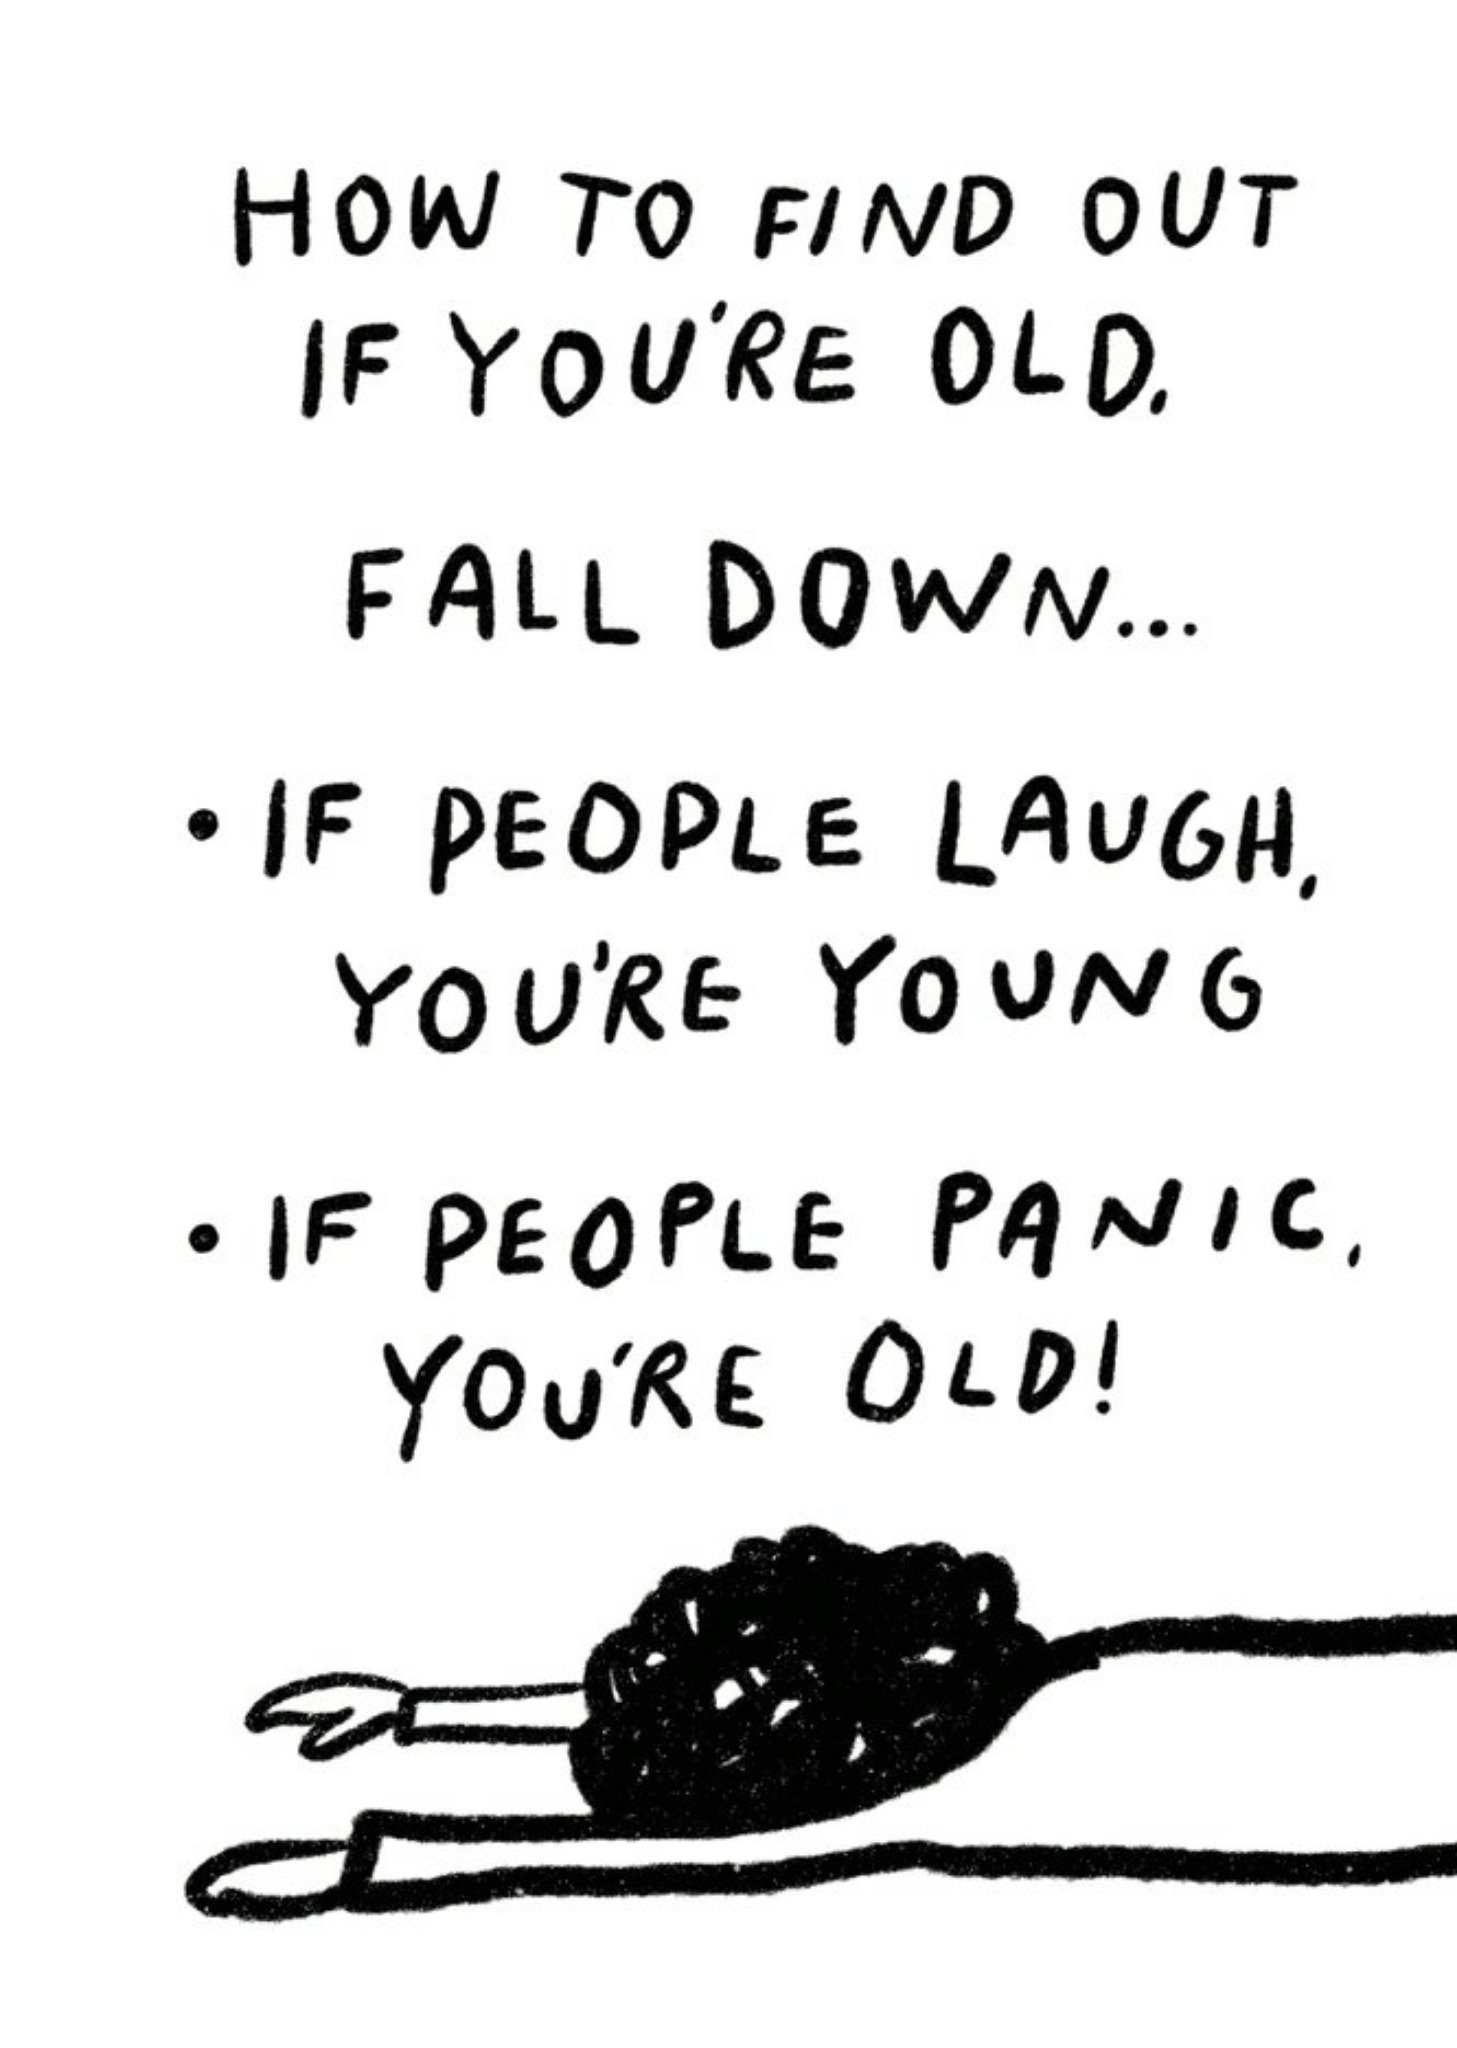 Other Pigment Find Out You Are Old Falling Down People Laugh People Panic Birthday Card Ecard